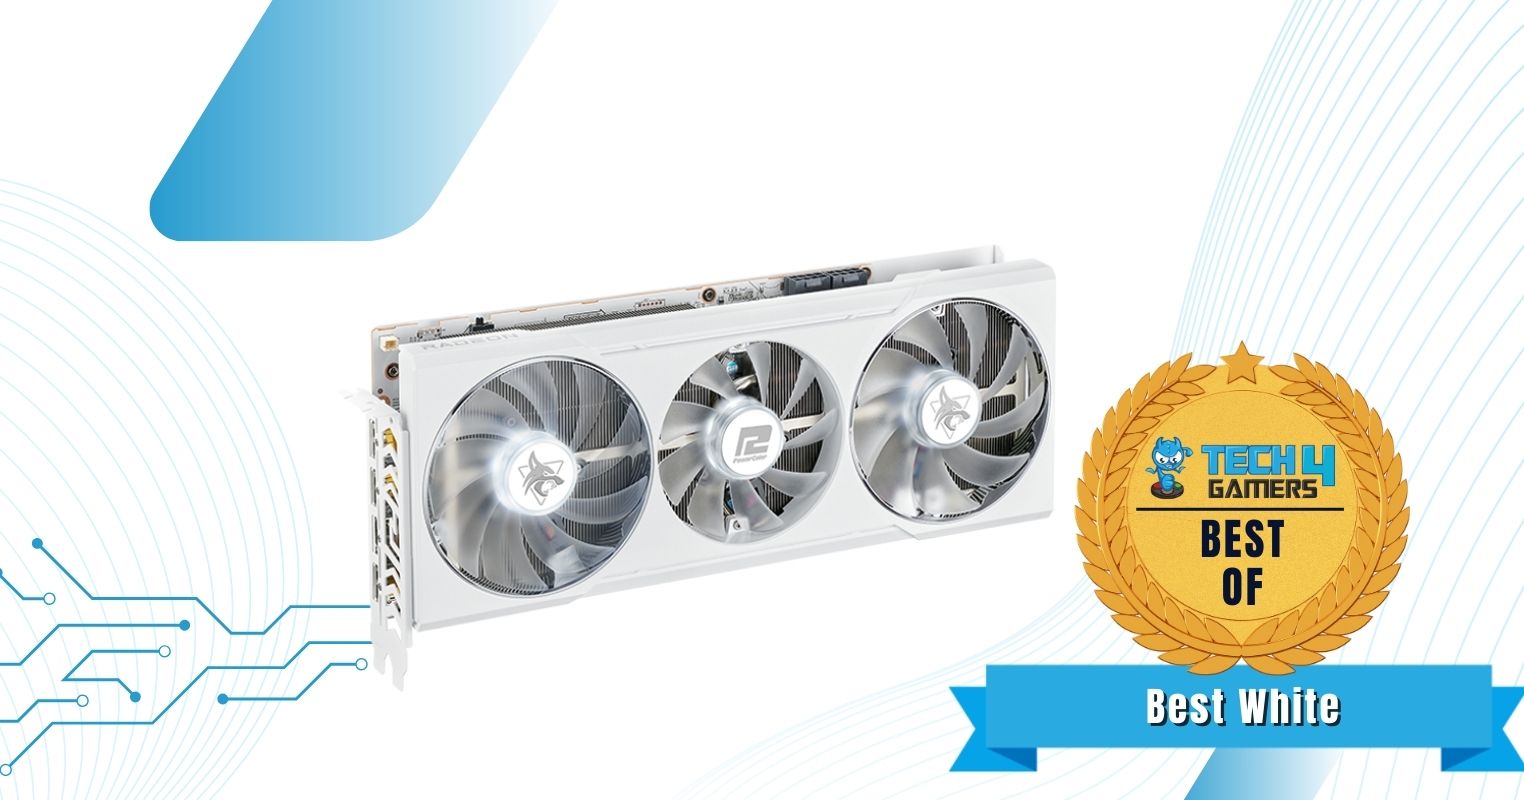 PowerColor Hellhound Spectral White AMD Radeon RX 6700 XT Gaming - Best RX 6700 XT for White Build